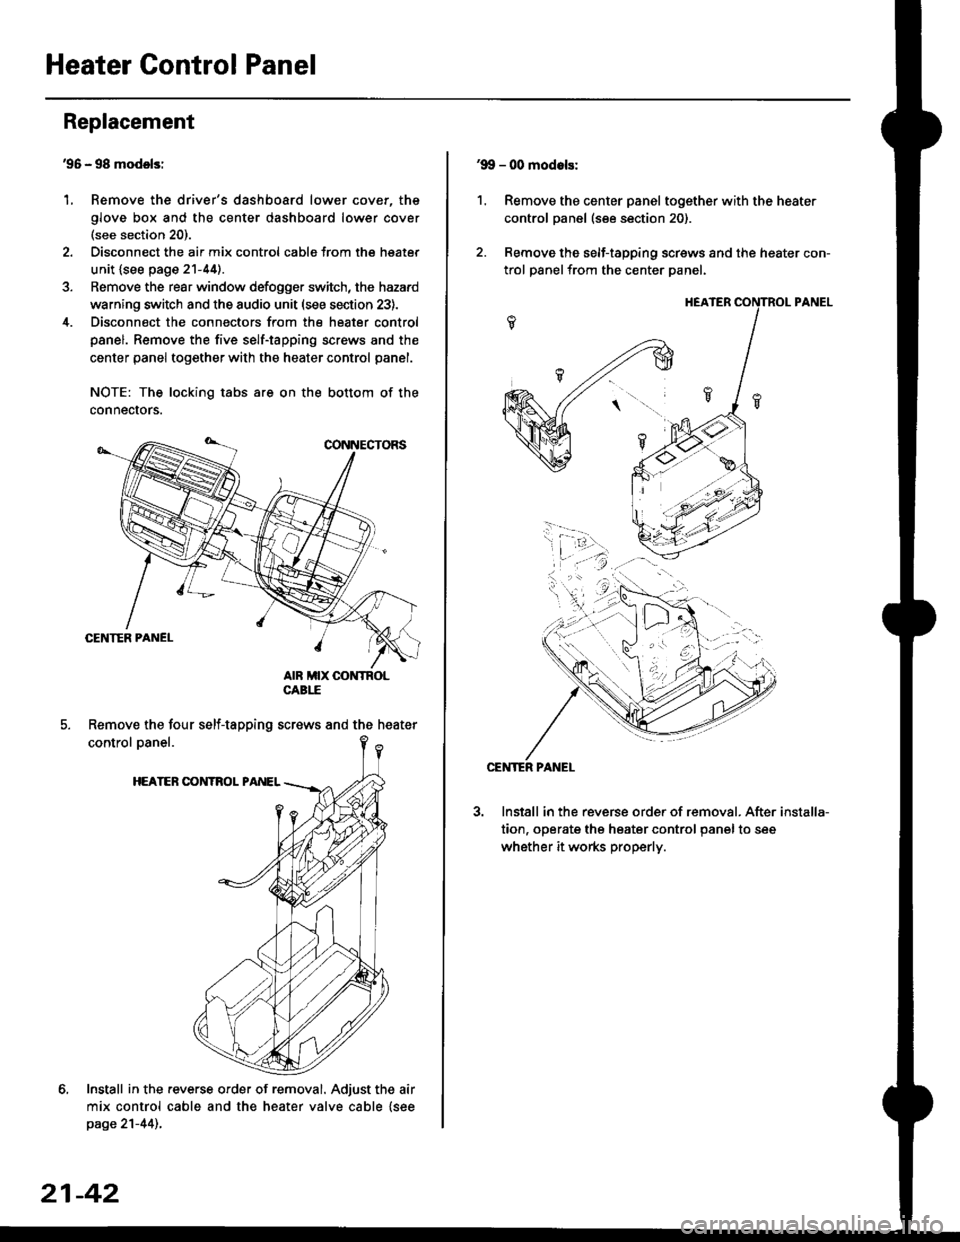 HONDA CIVIC 1998 6.G Workshop Manual Heater Control Panel
95 - 98 modolsi
Remove the drivers dashboard lower cover, the
glove box and the center dashboard lower cover(see section 20).
Disconnect the air mix control cabls from the heate